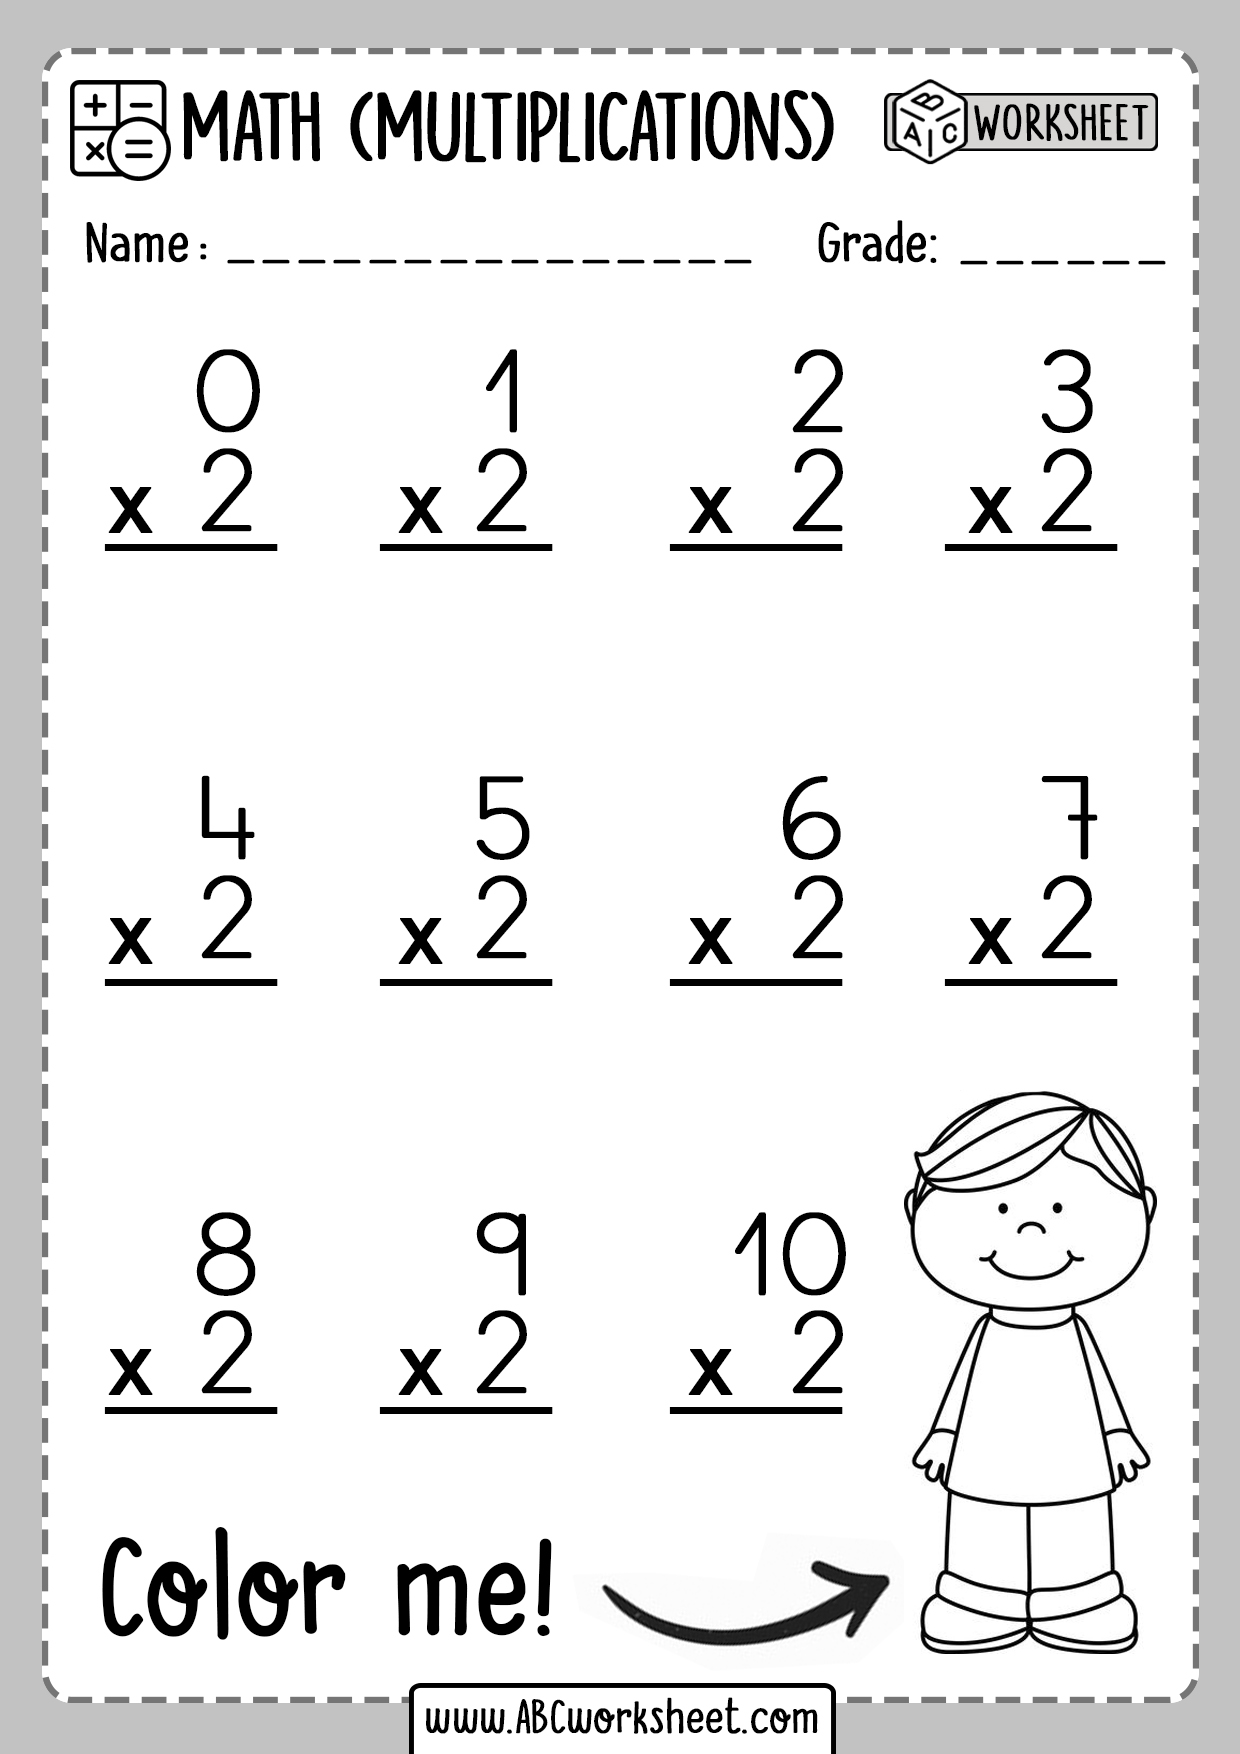 times-tables-multiplication-worksheets-junkynored